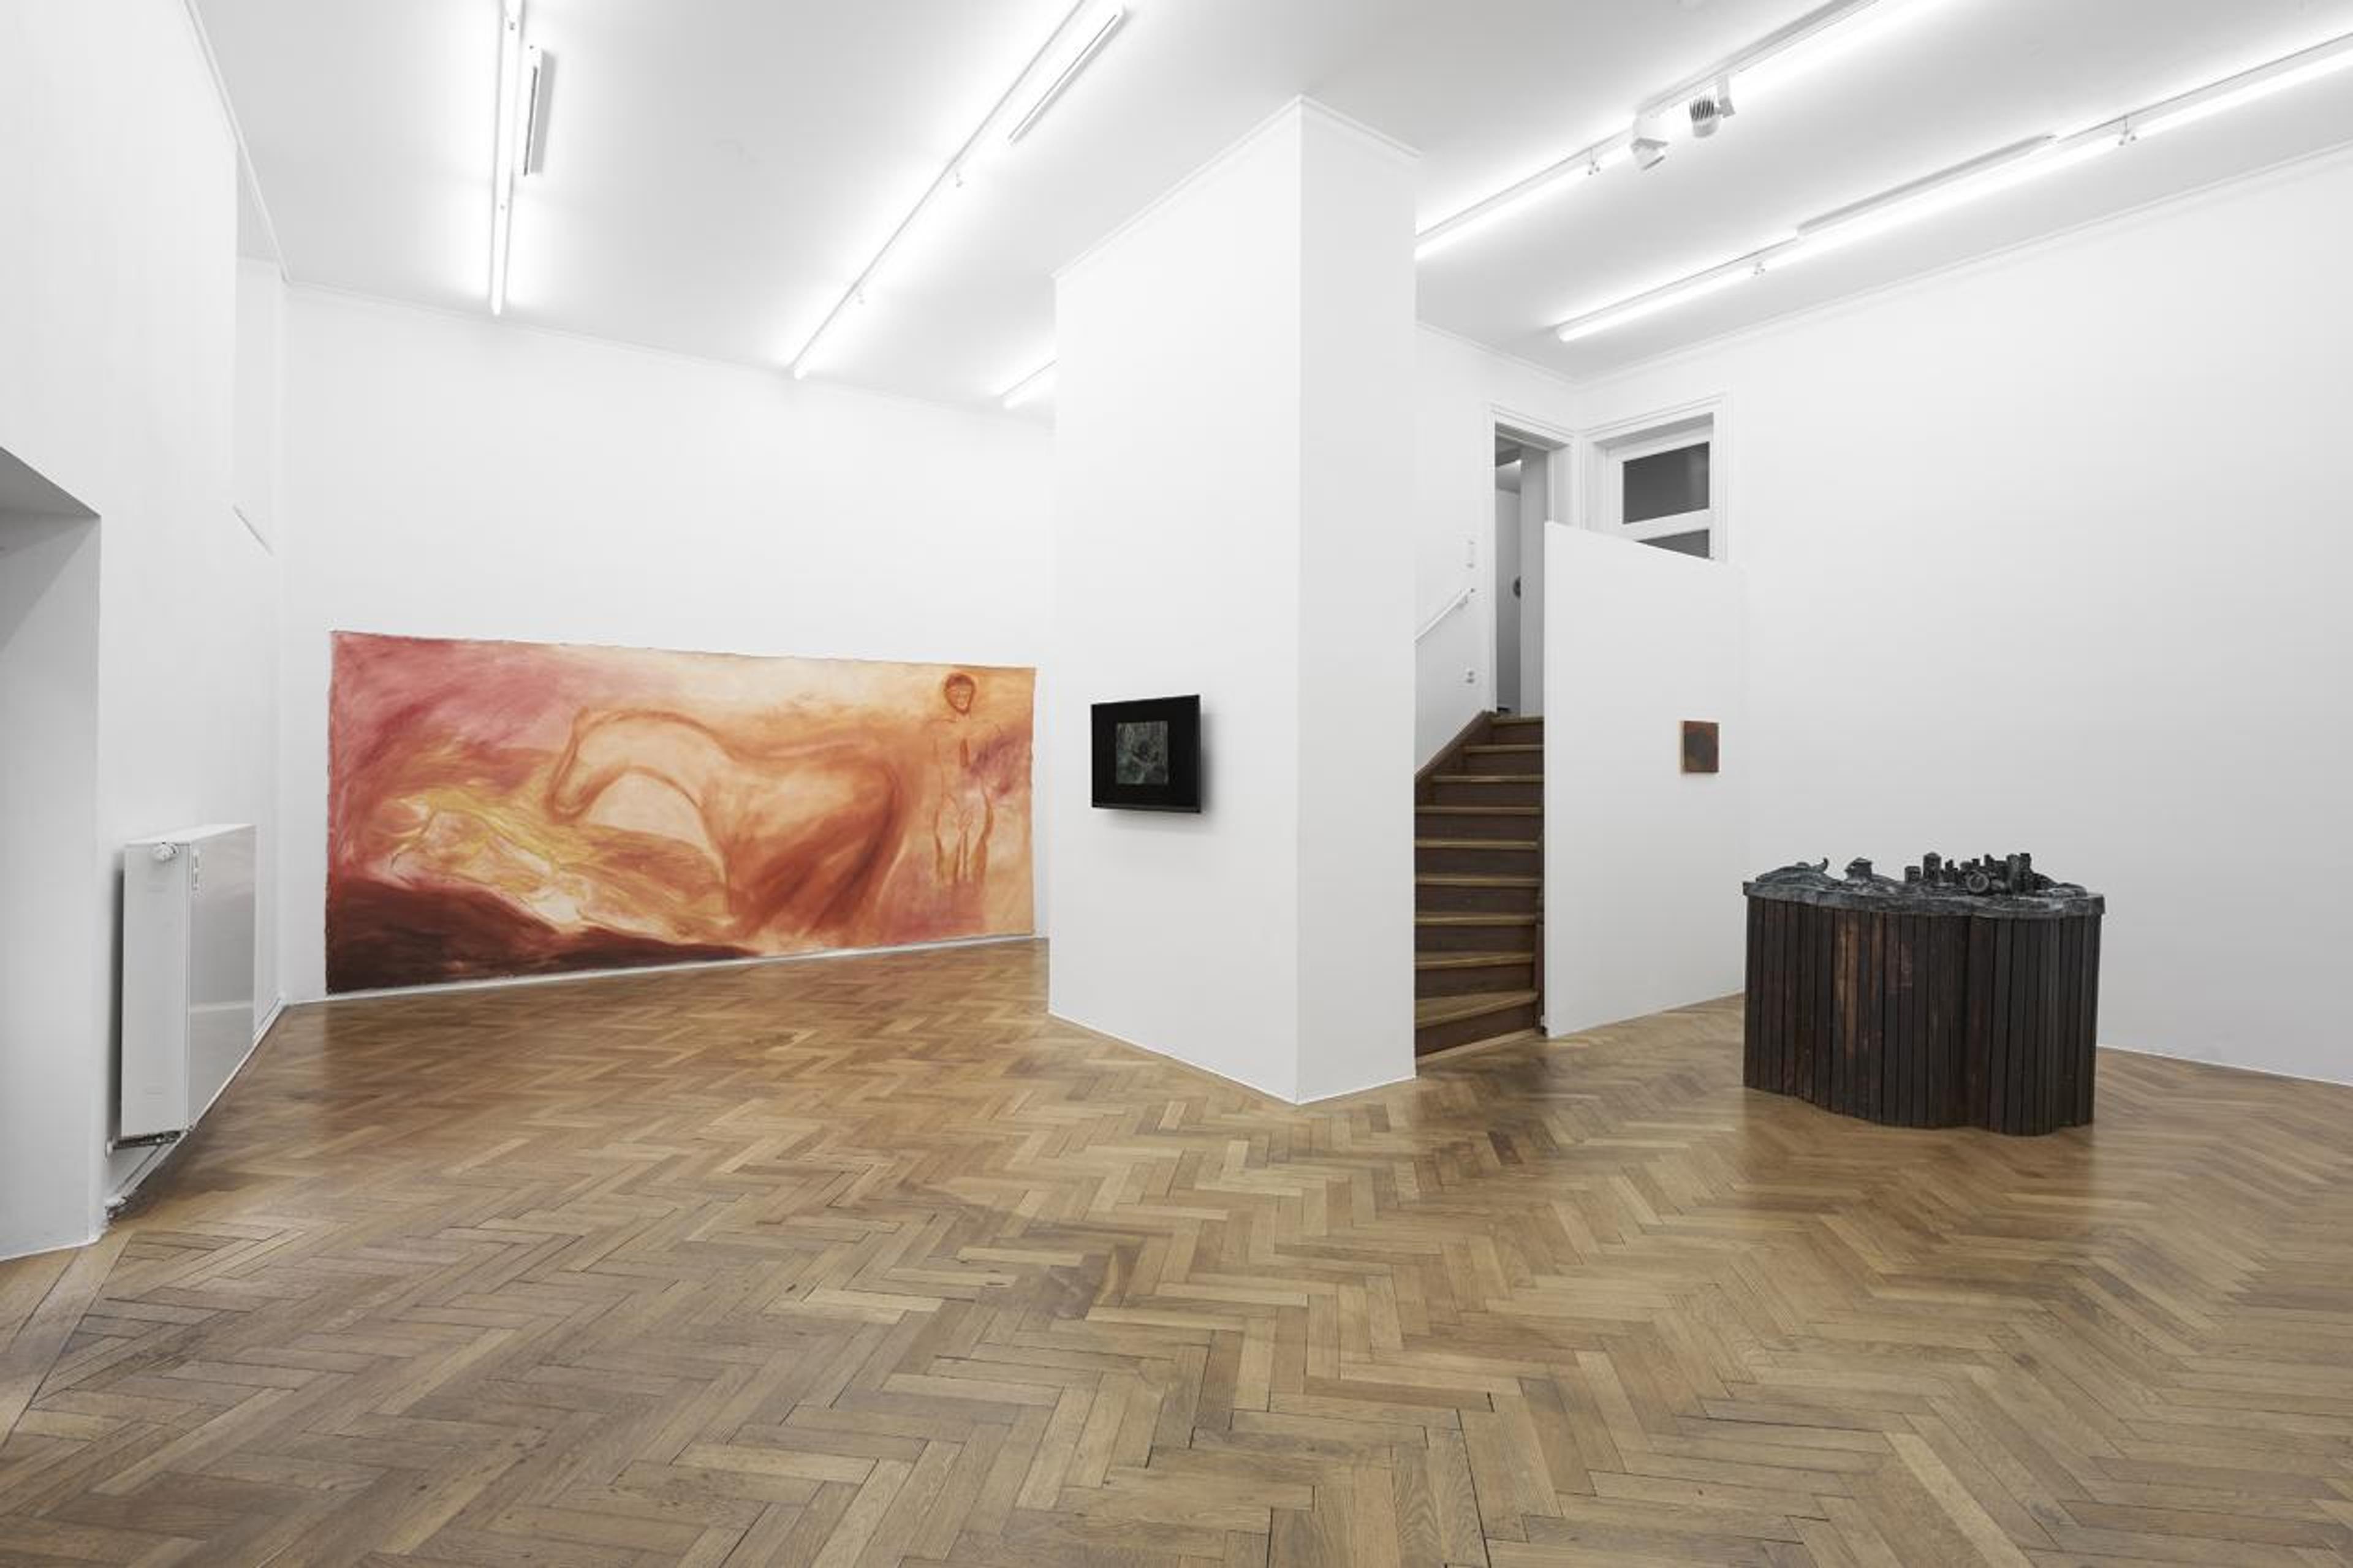 Installation view, Lena Henke, Dominique Knowles, and Megan Francis Sullivan; Sperling Gallery Munich in collaboration with Galerie Emanuel Layr (Vienna/Rome), 2020